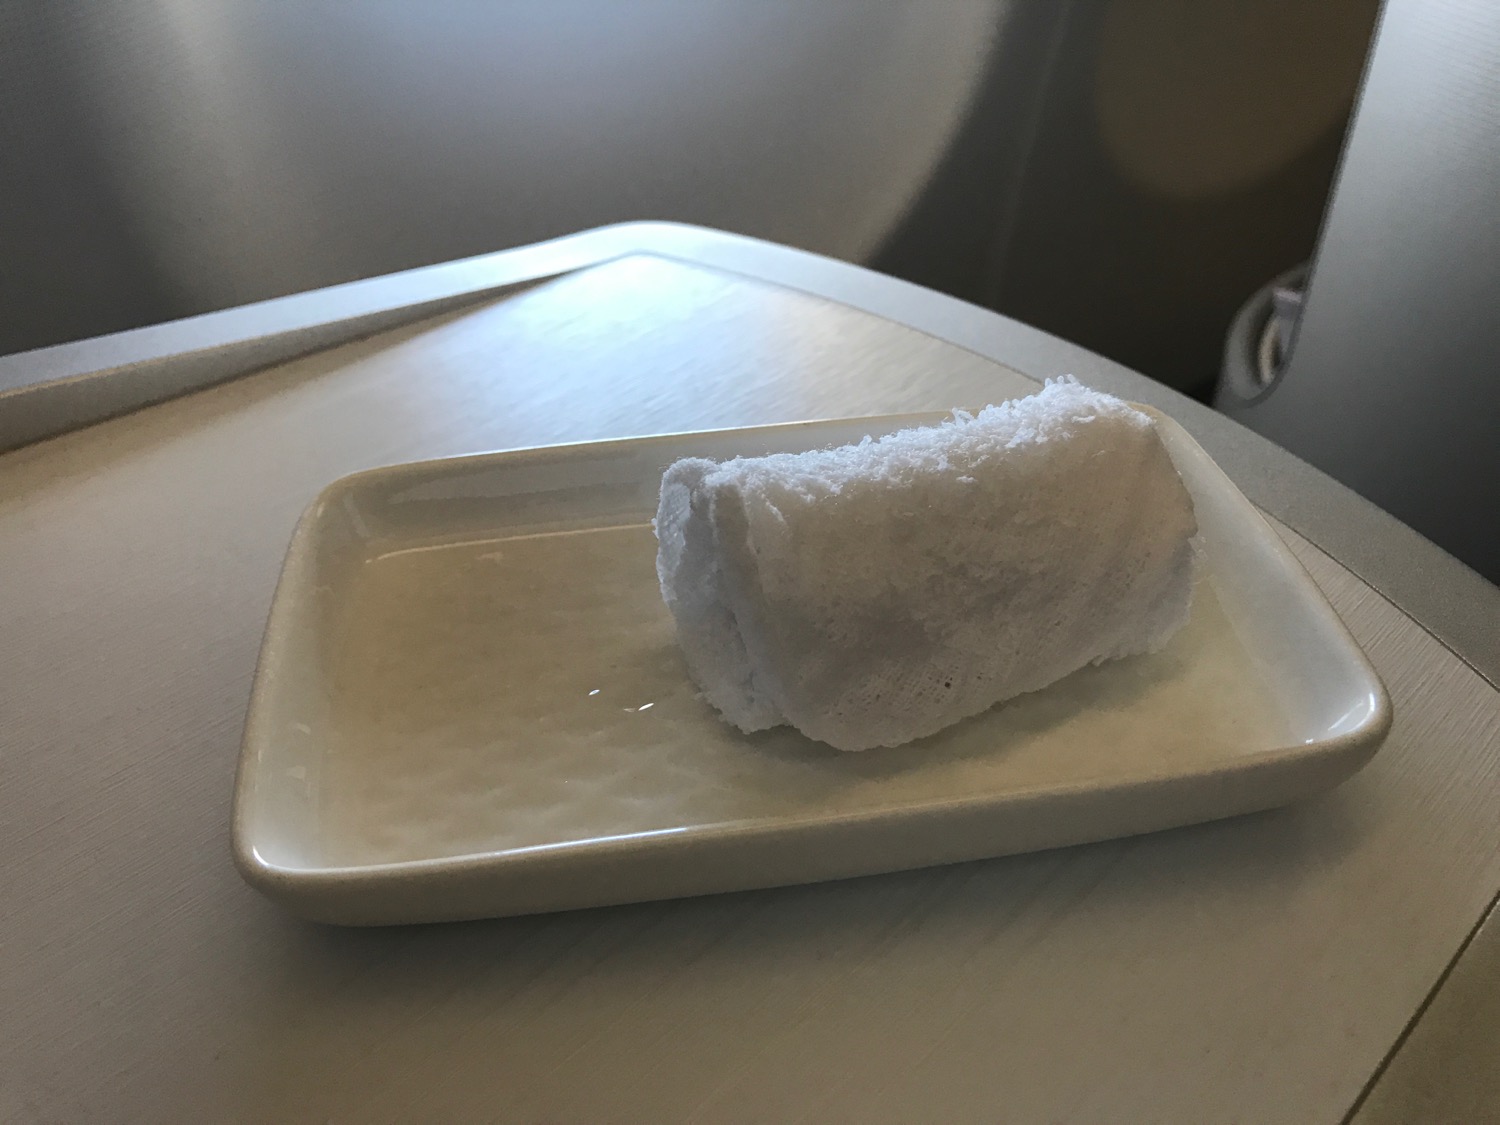 a rolled up white object on a white plate